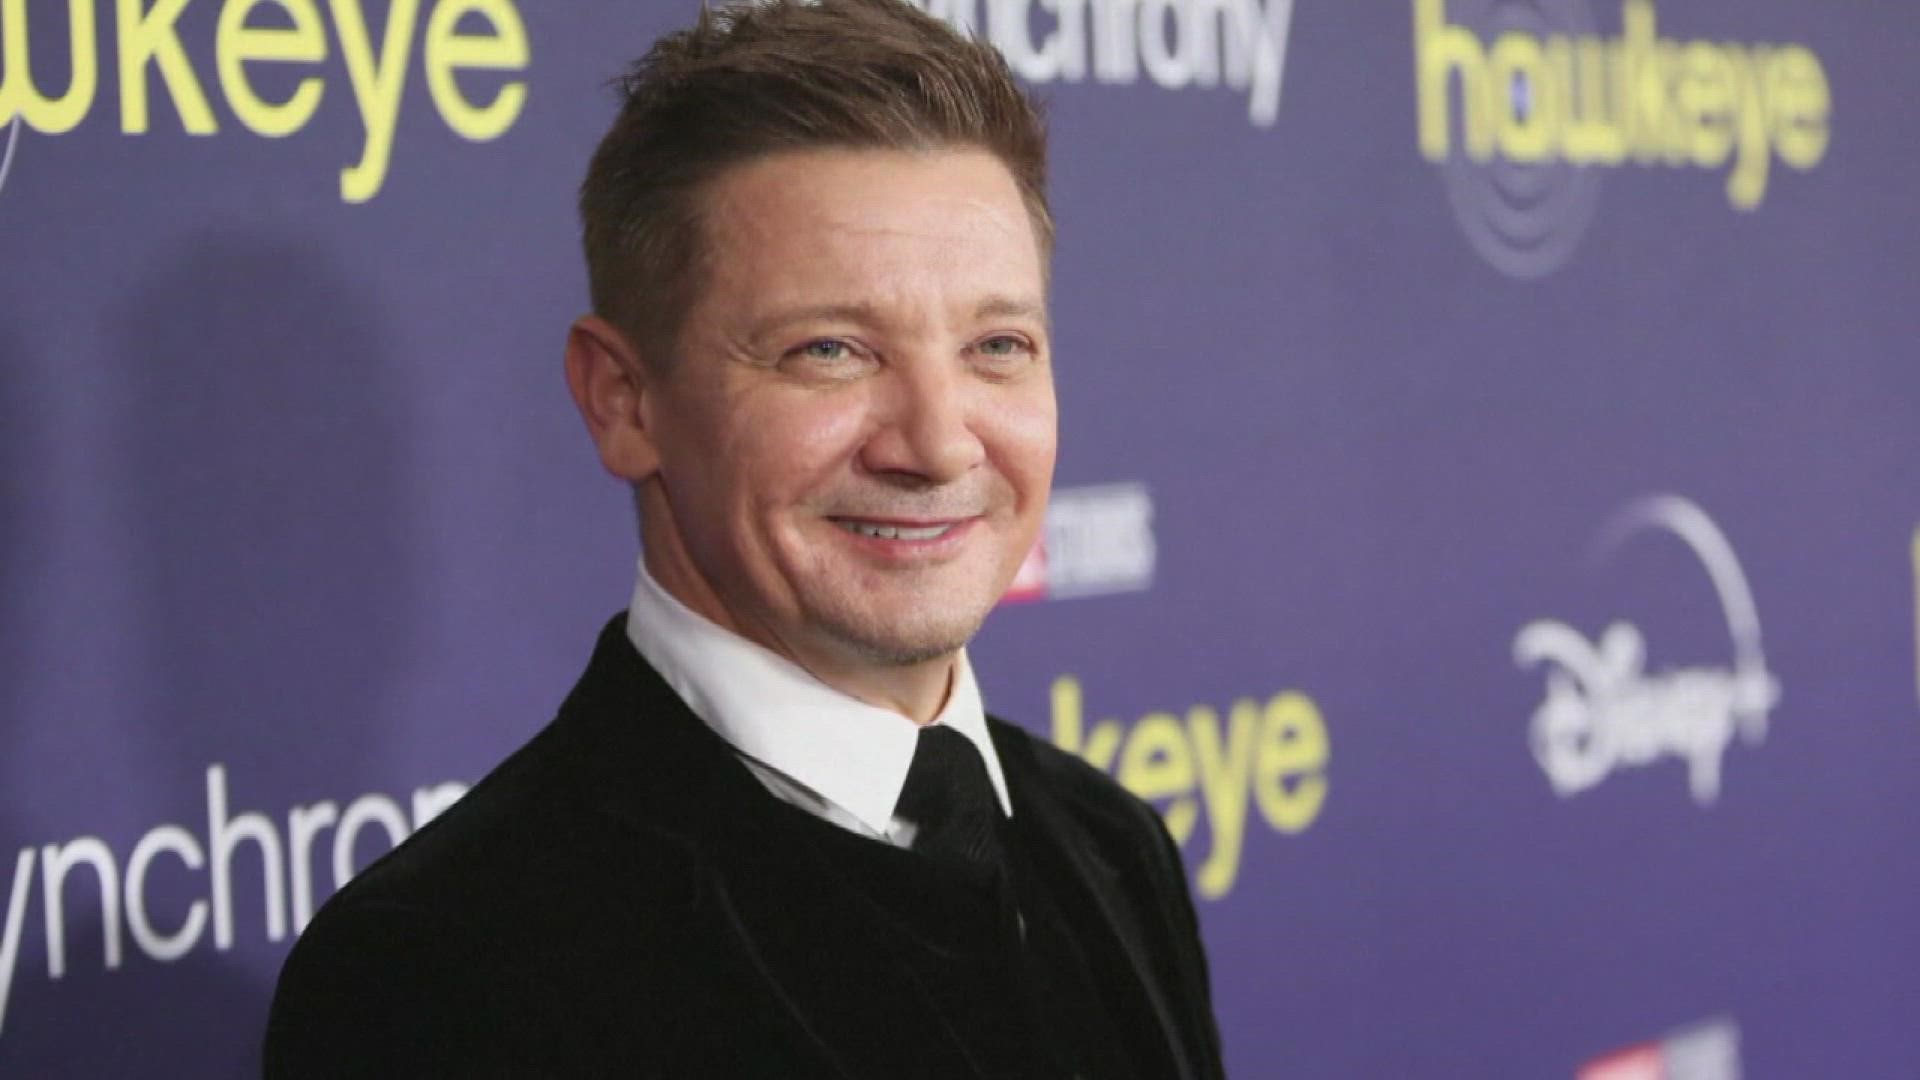 Jeremy Renner was run over by a snowcat while helping a stranded driver, a Nevada sheriff said. And more in Top 10 headlines.